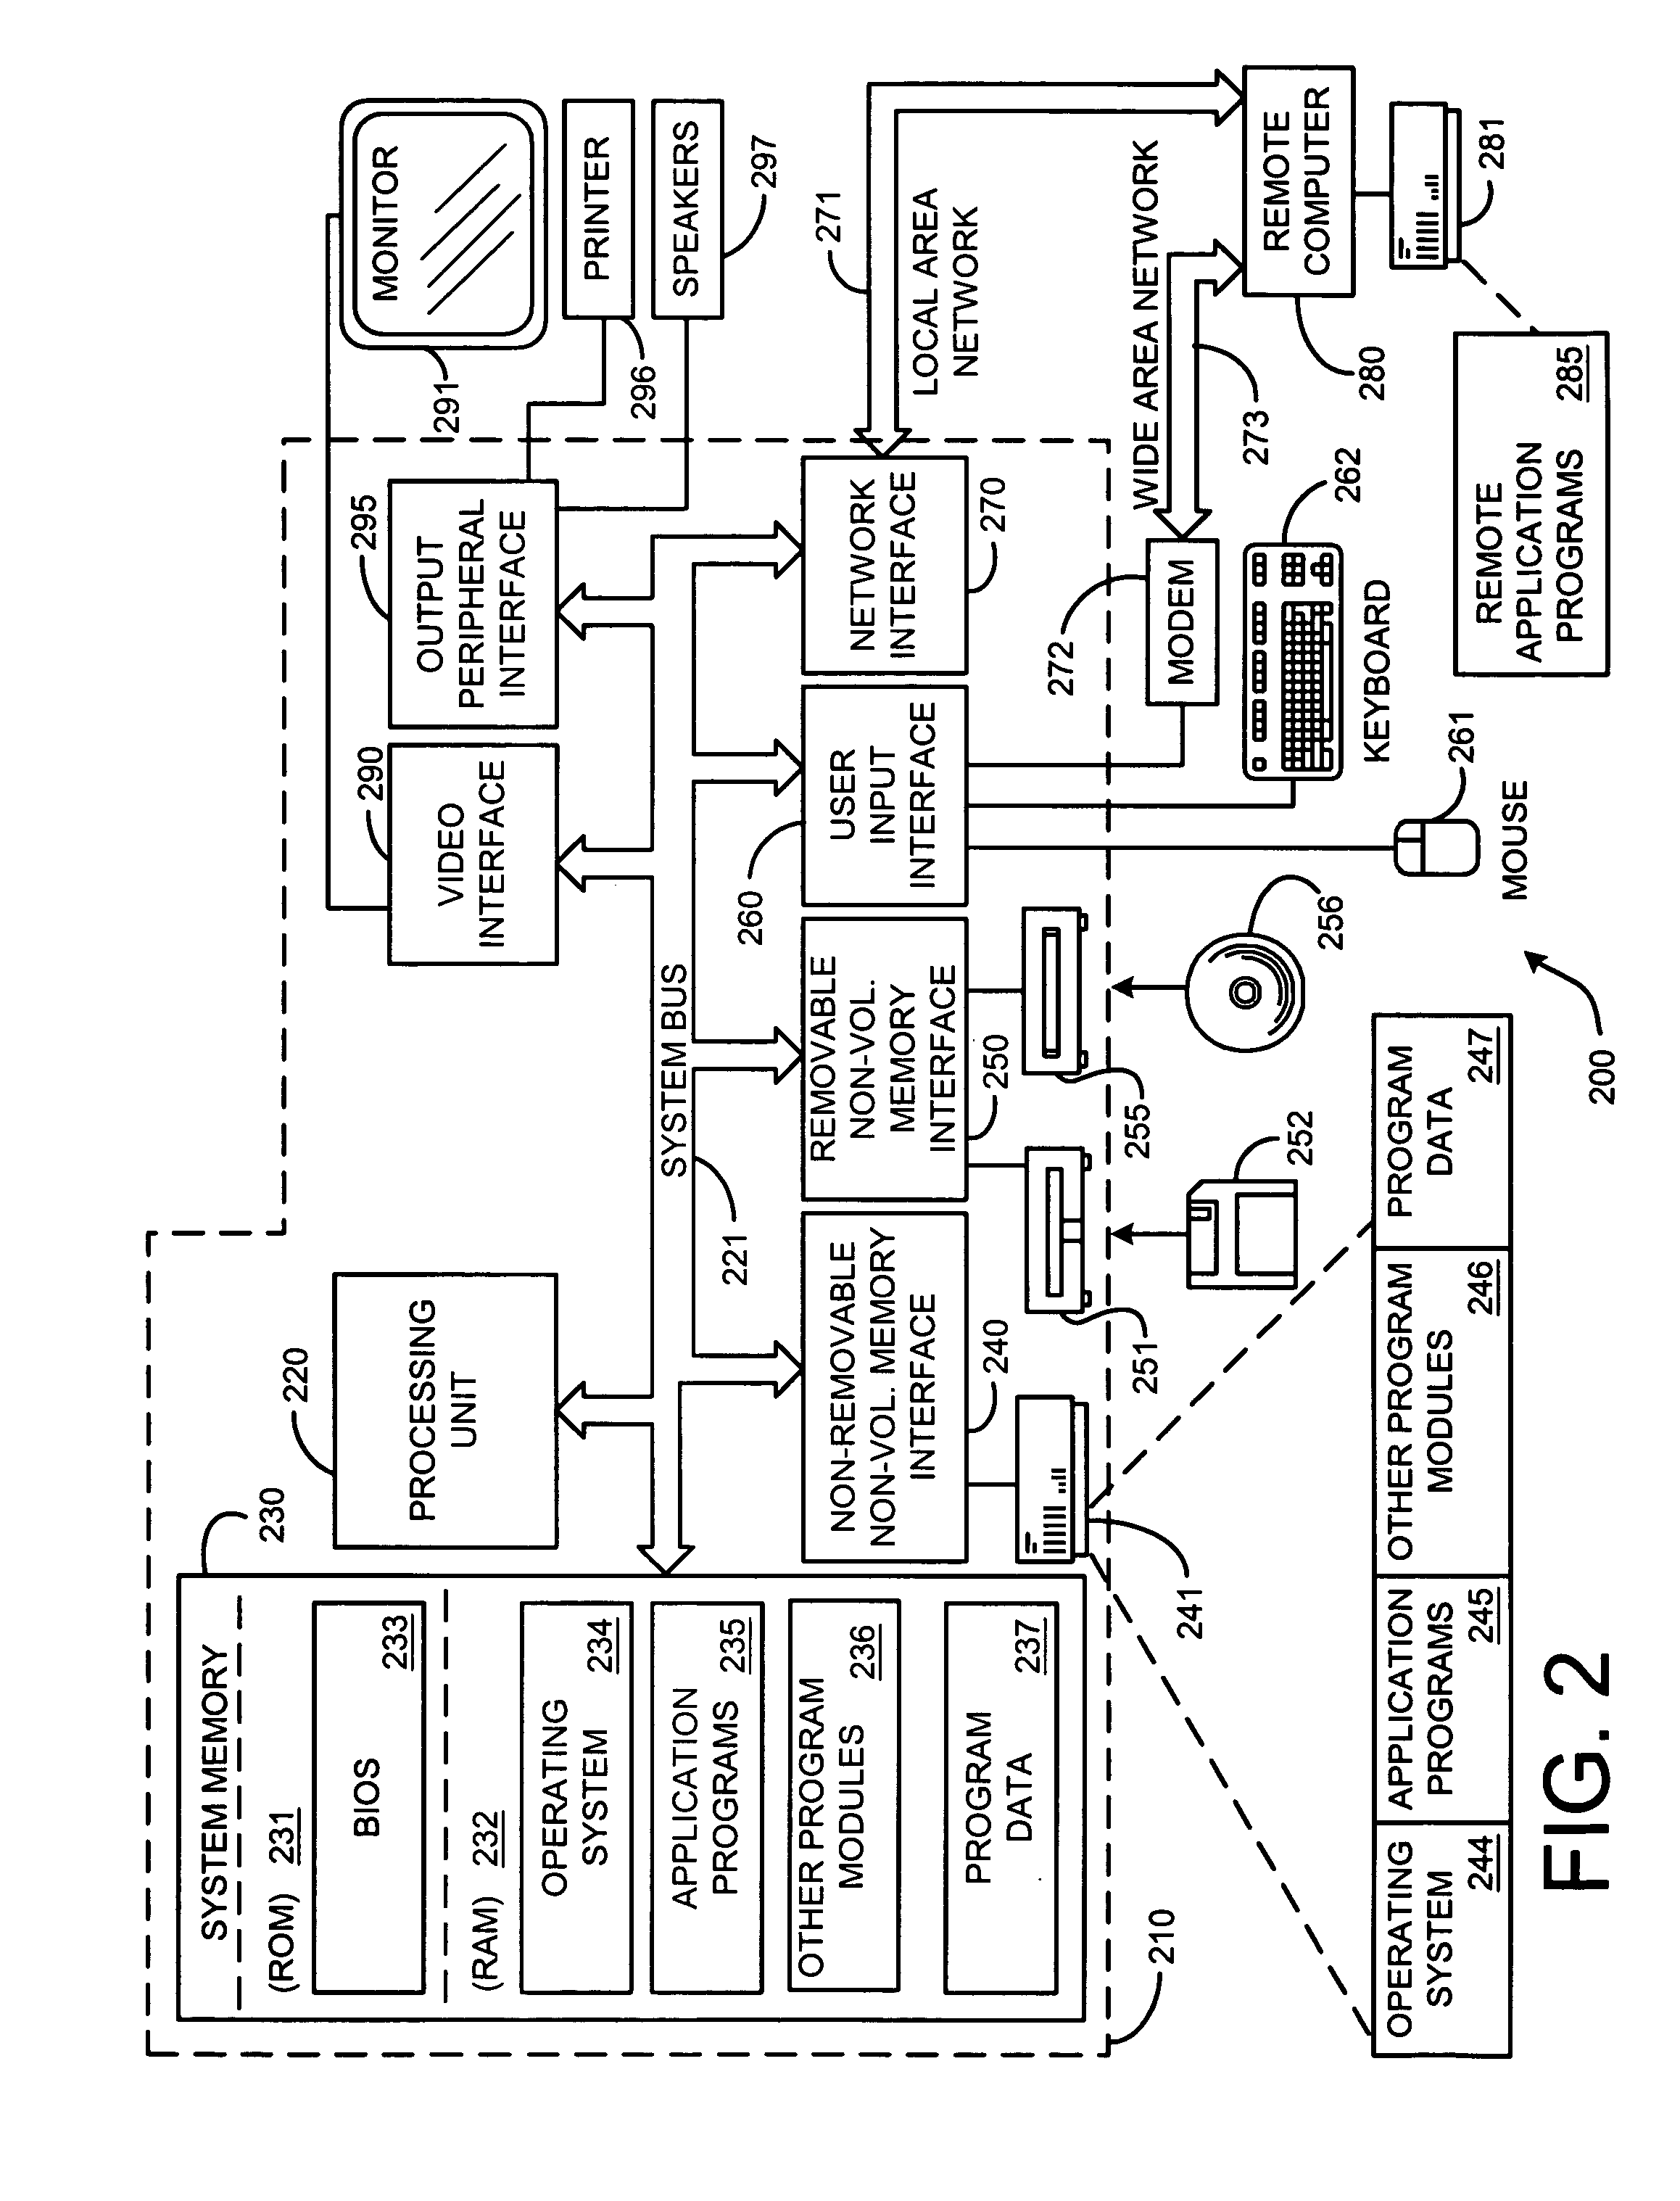 Implicit links search enhancement system and method for search engines using implicit links generated by mining user access patterns